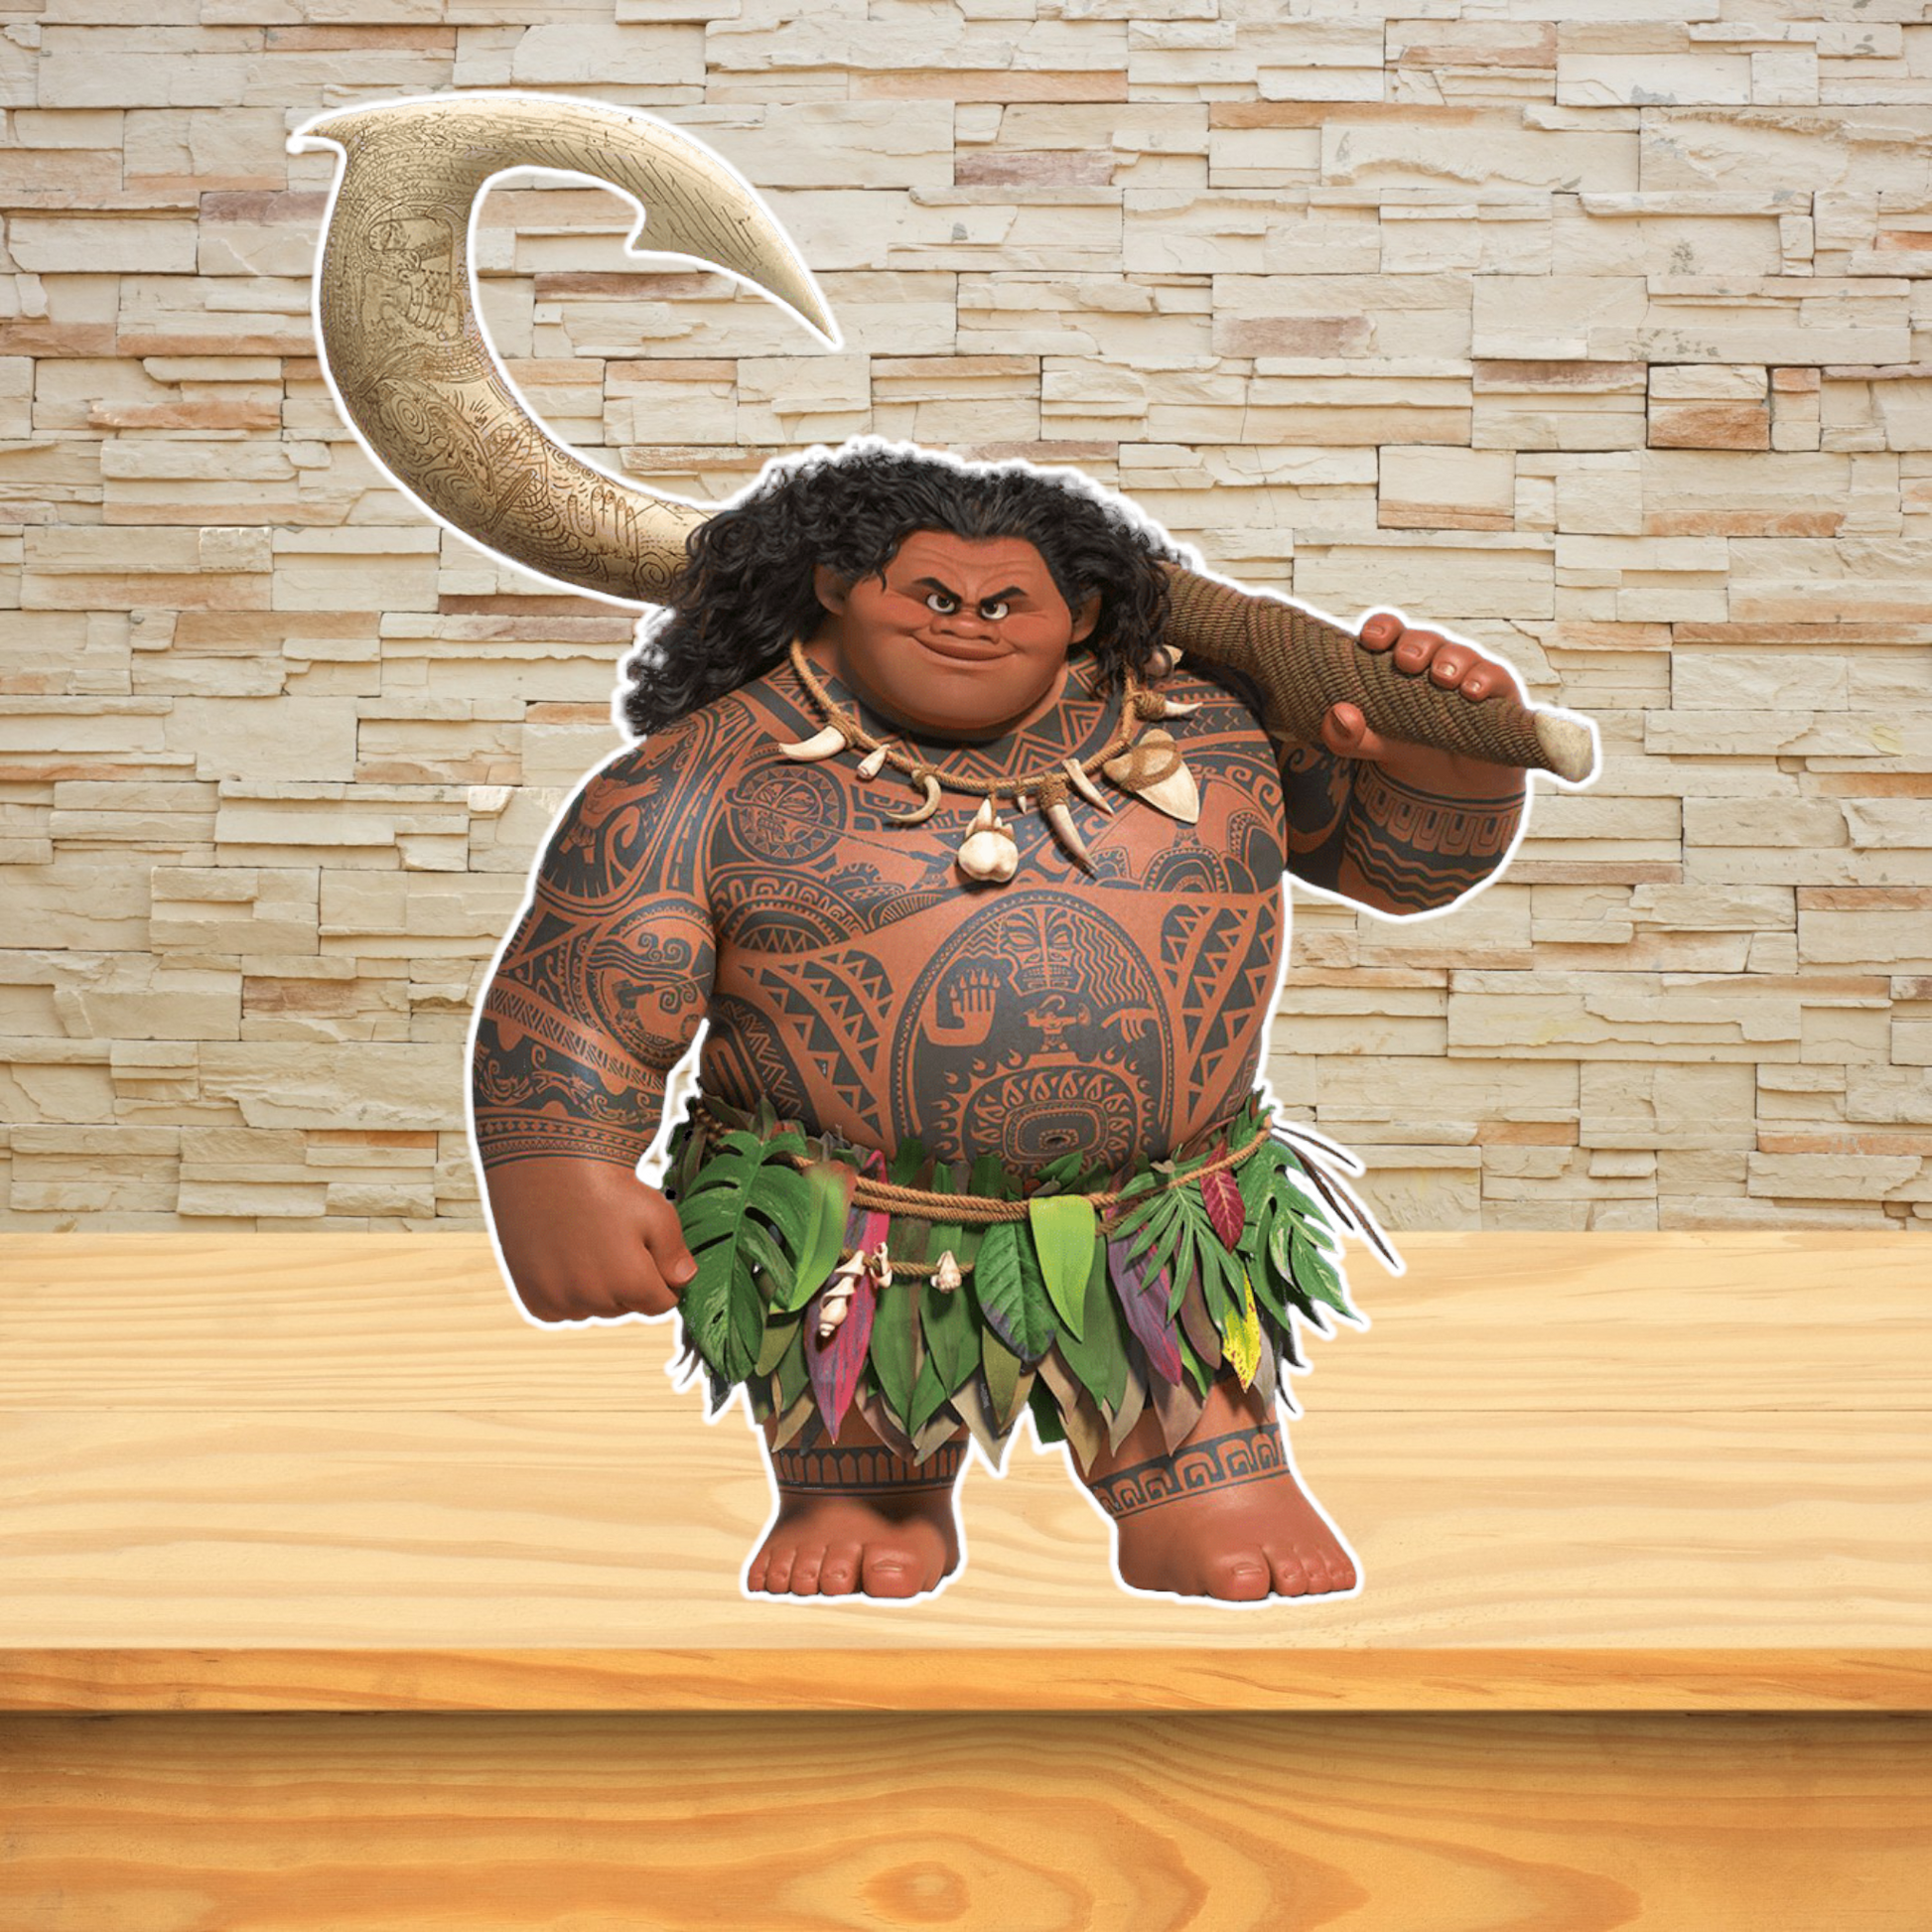 Maui custom character cutout, centerpiece, Cake toppers, cupcake toppers,  Backdrops, Standee, Props, Birthday Party theme – DN Decorlance By: DarNil  Dynasty LLC